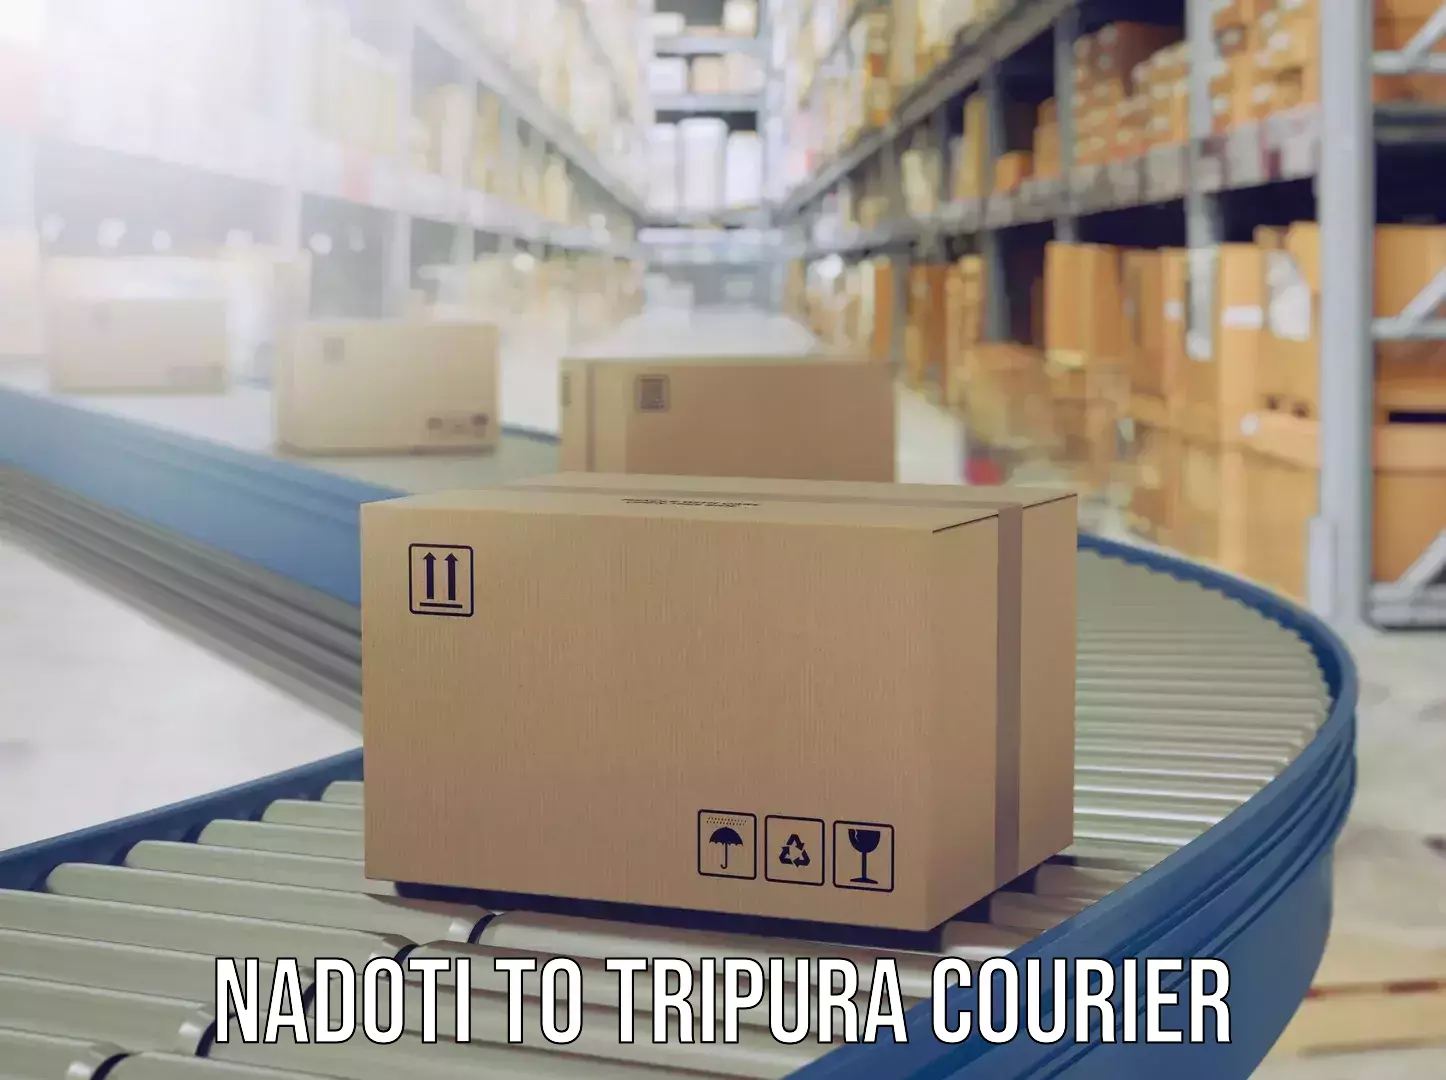 Luggage shipping specialists Nadoti to North Tripura